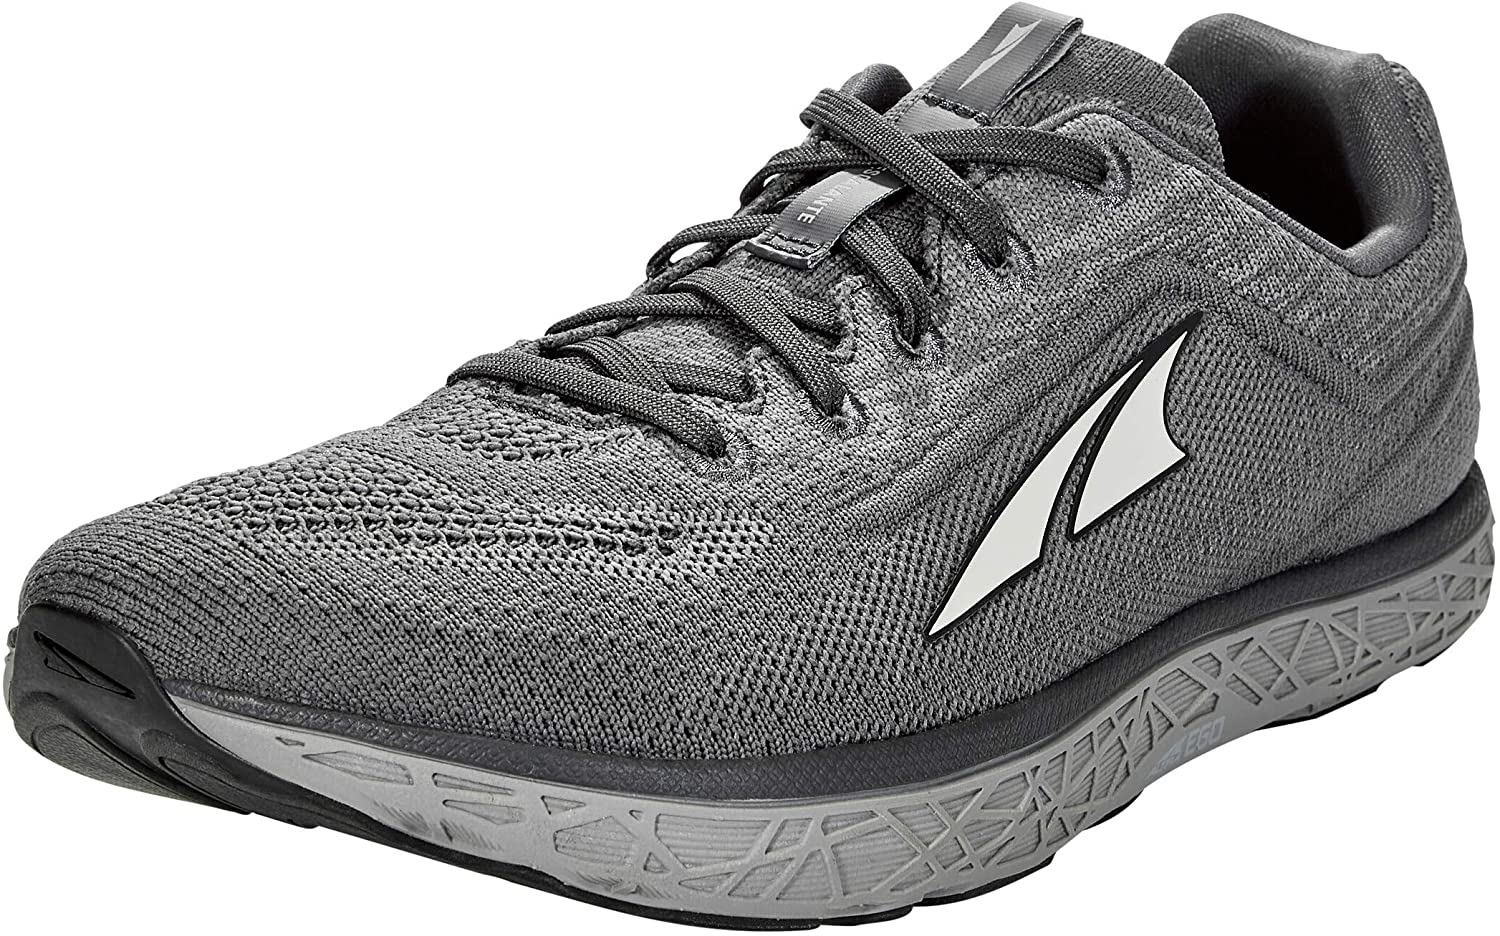 Altra Men's Escalante 2.5 Road Running Shoe in Gray from the side